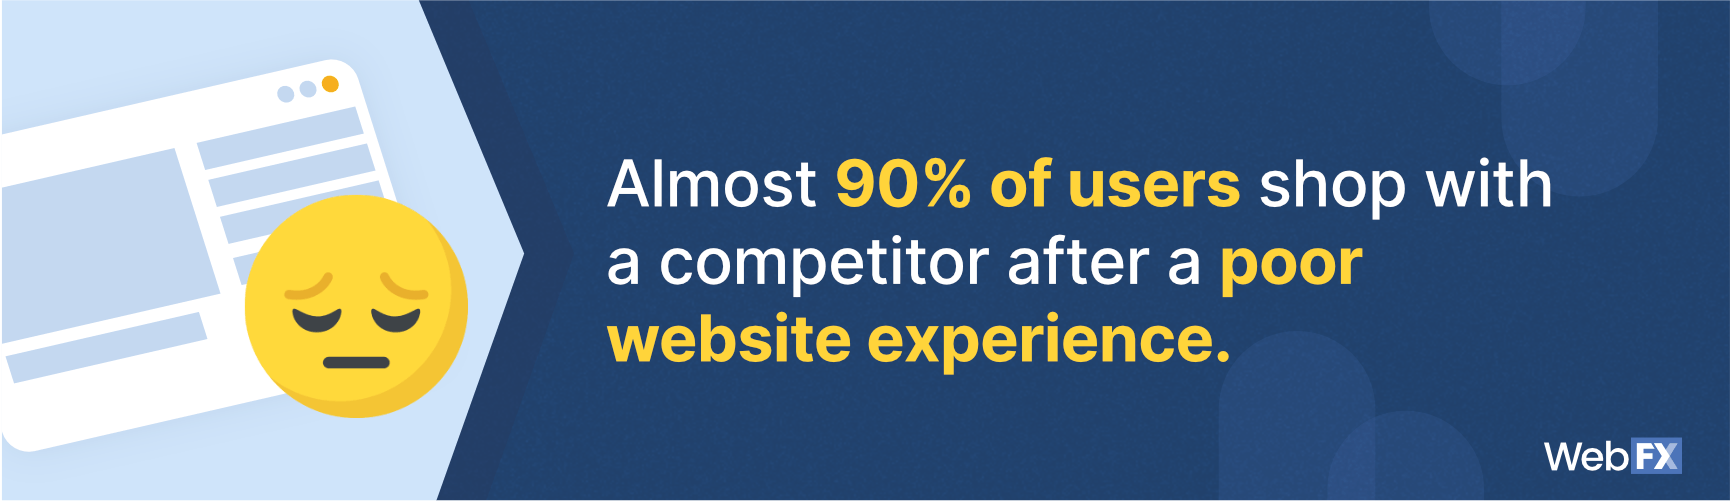 A statistic on the impact of UX on web design and user engagement